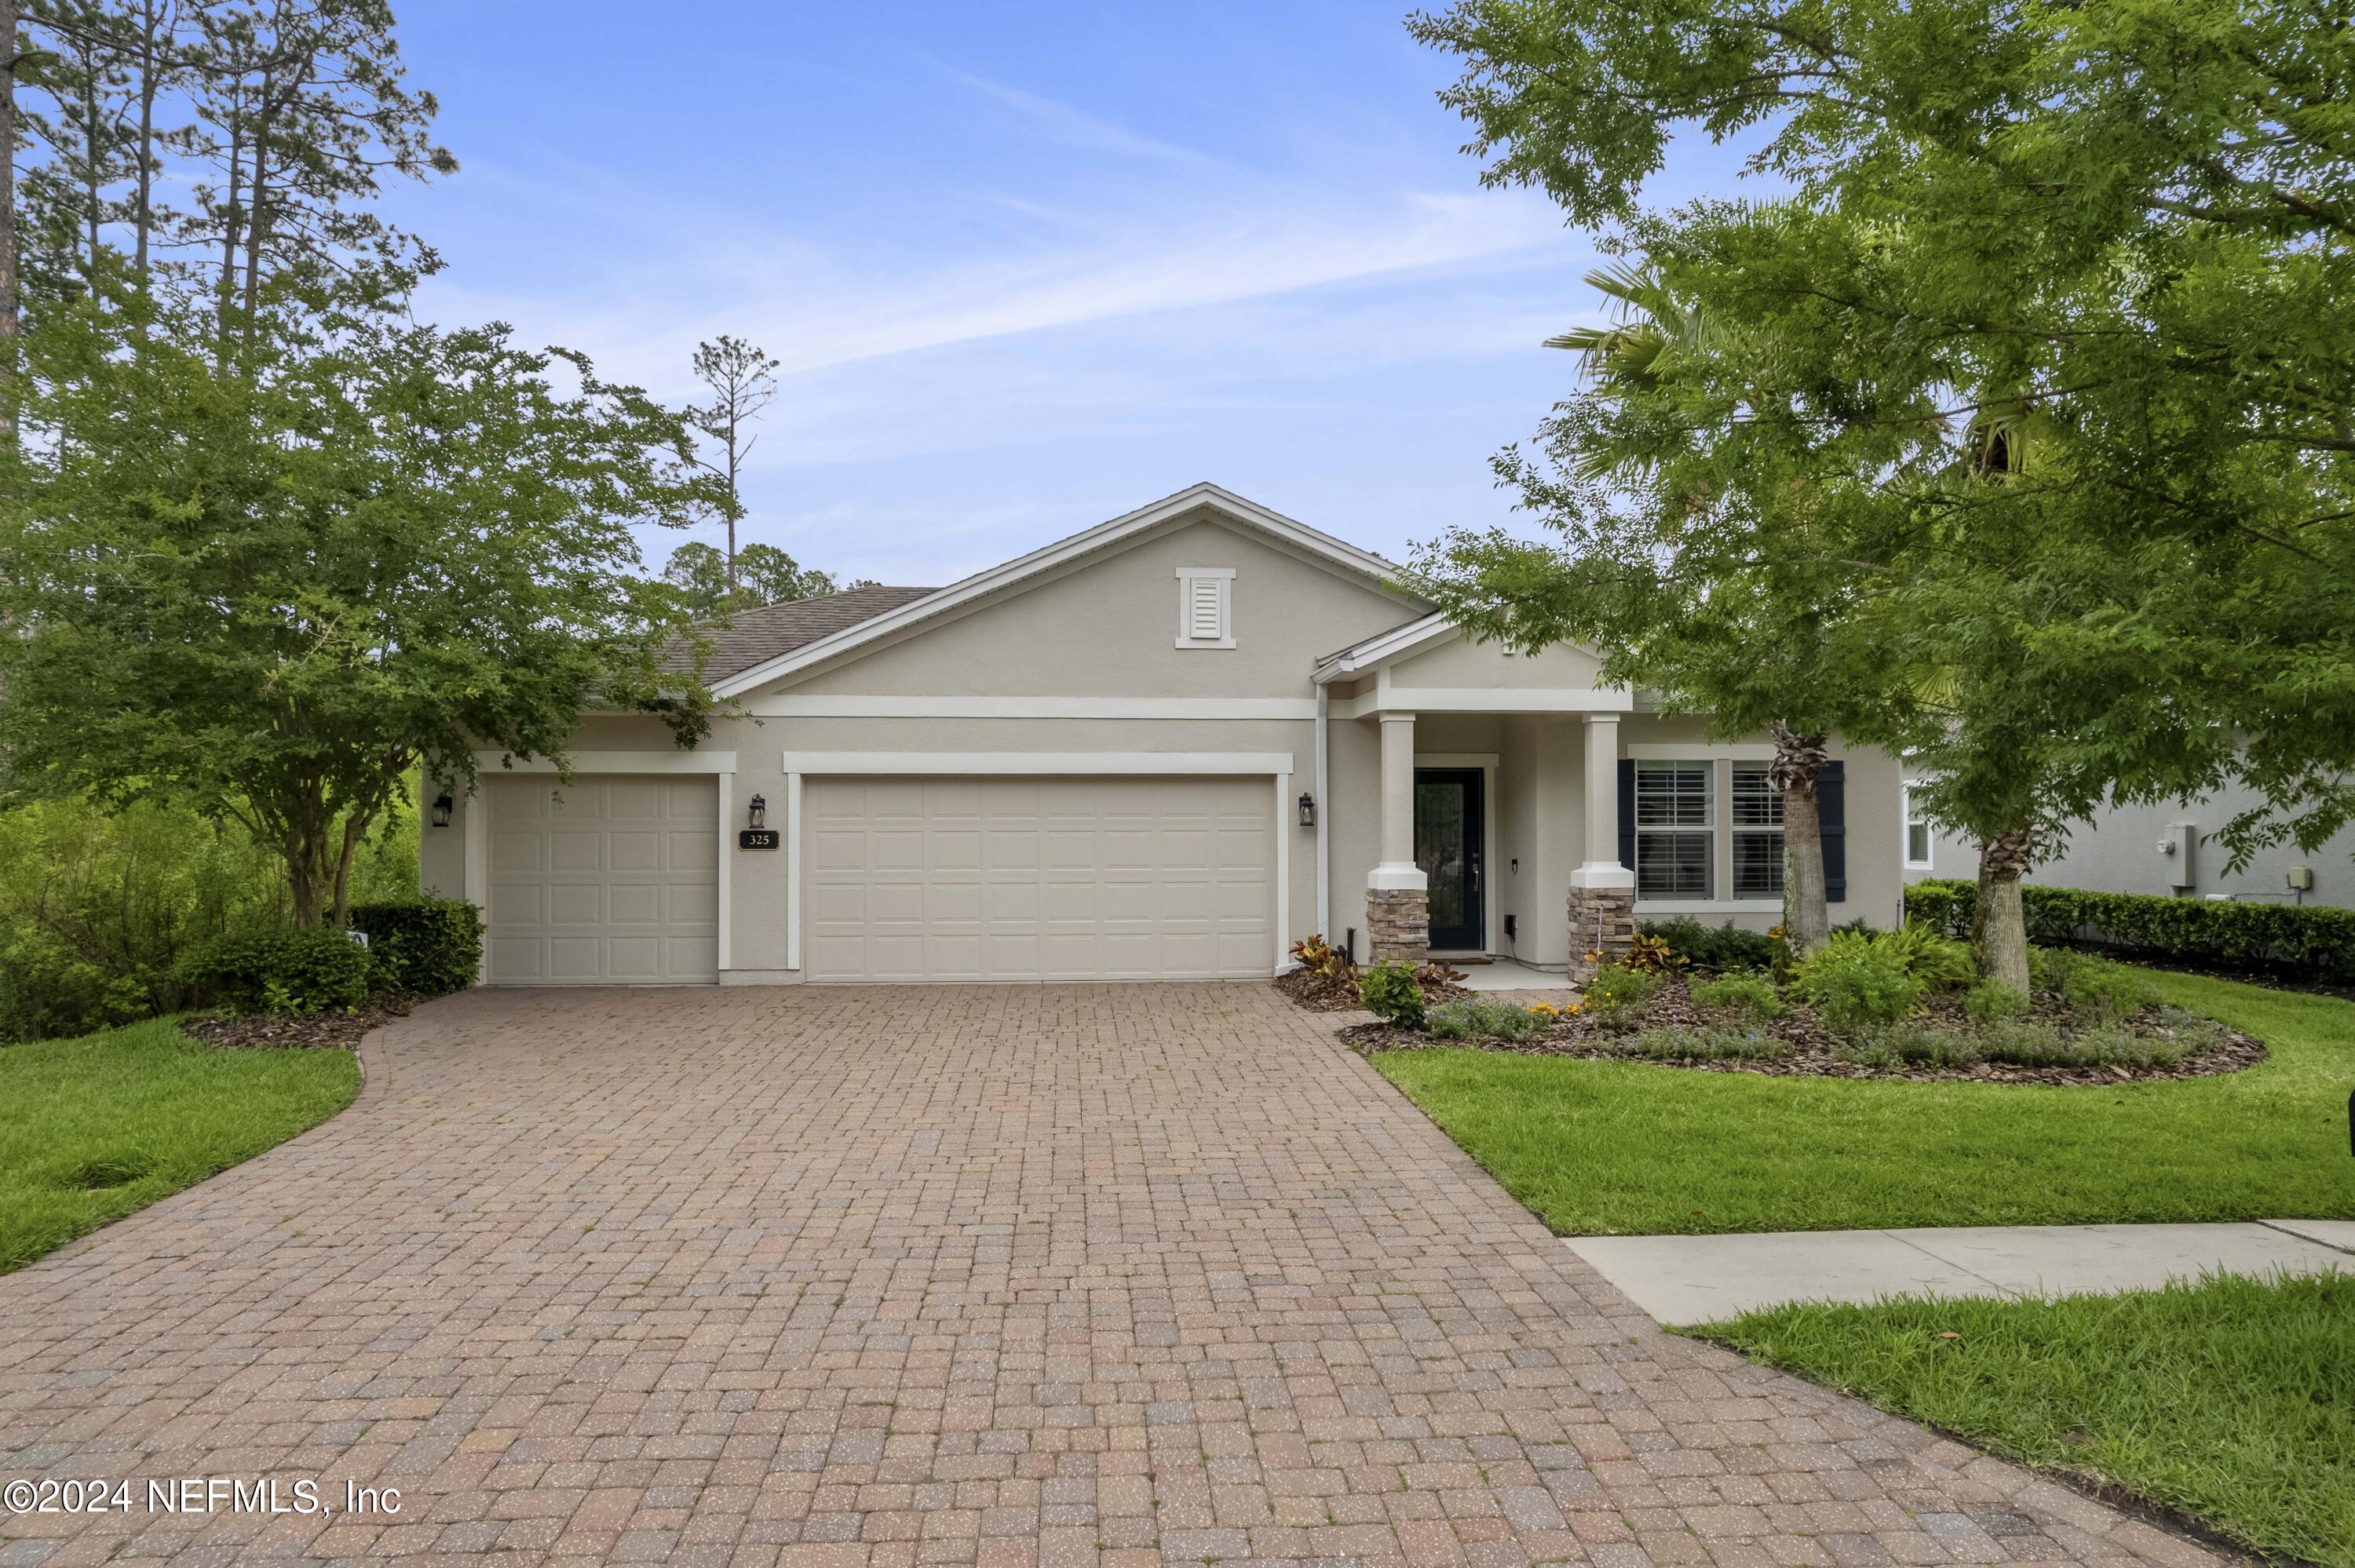 Jacksonville, FL home for sale located at 325 Willow Ridge Dr., Jacksonville, FL 32256